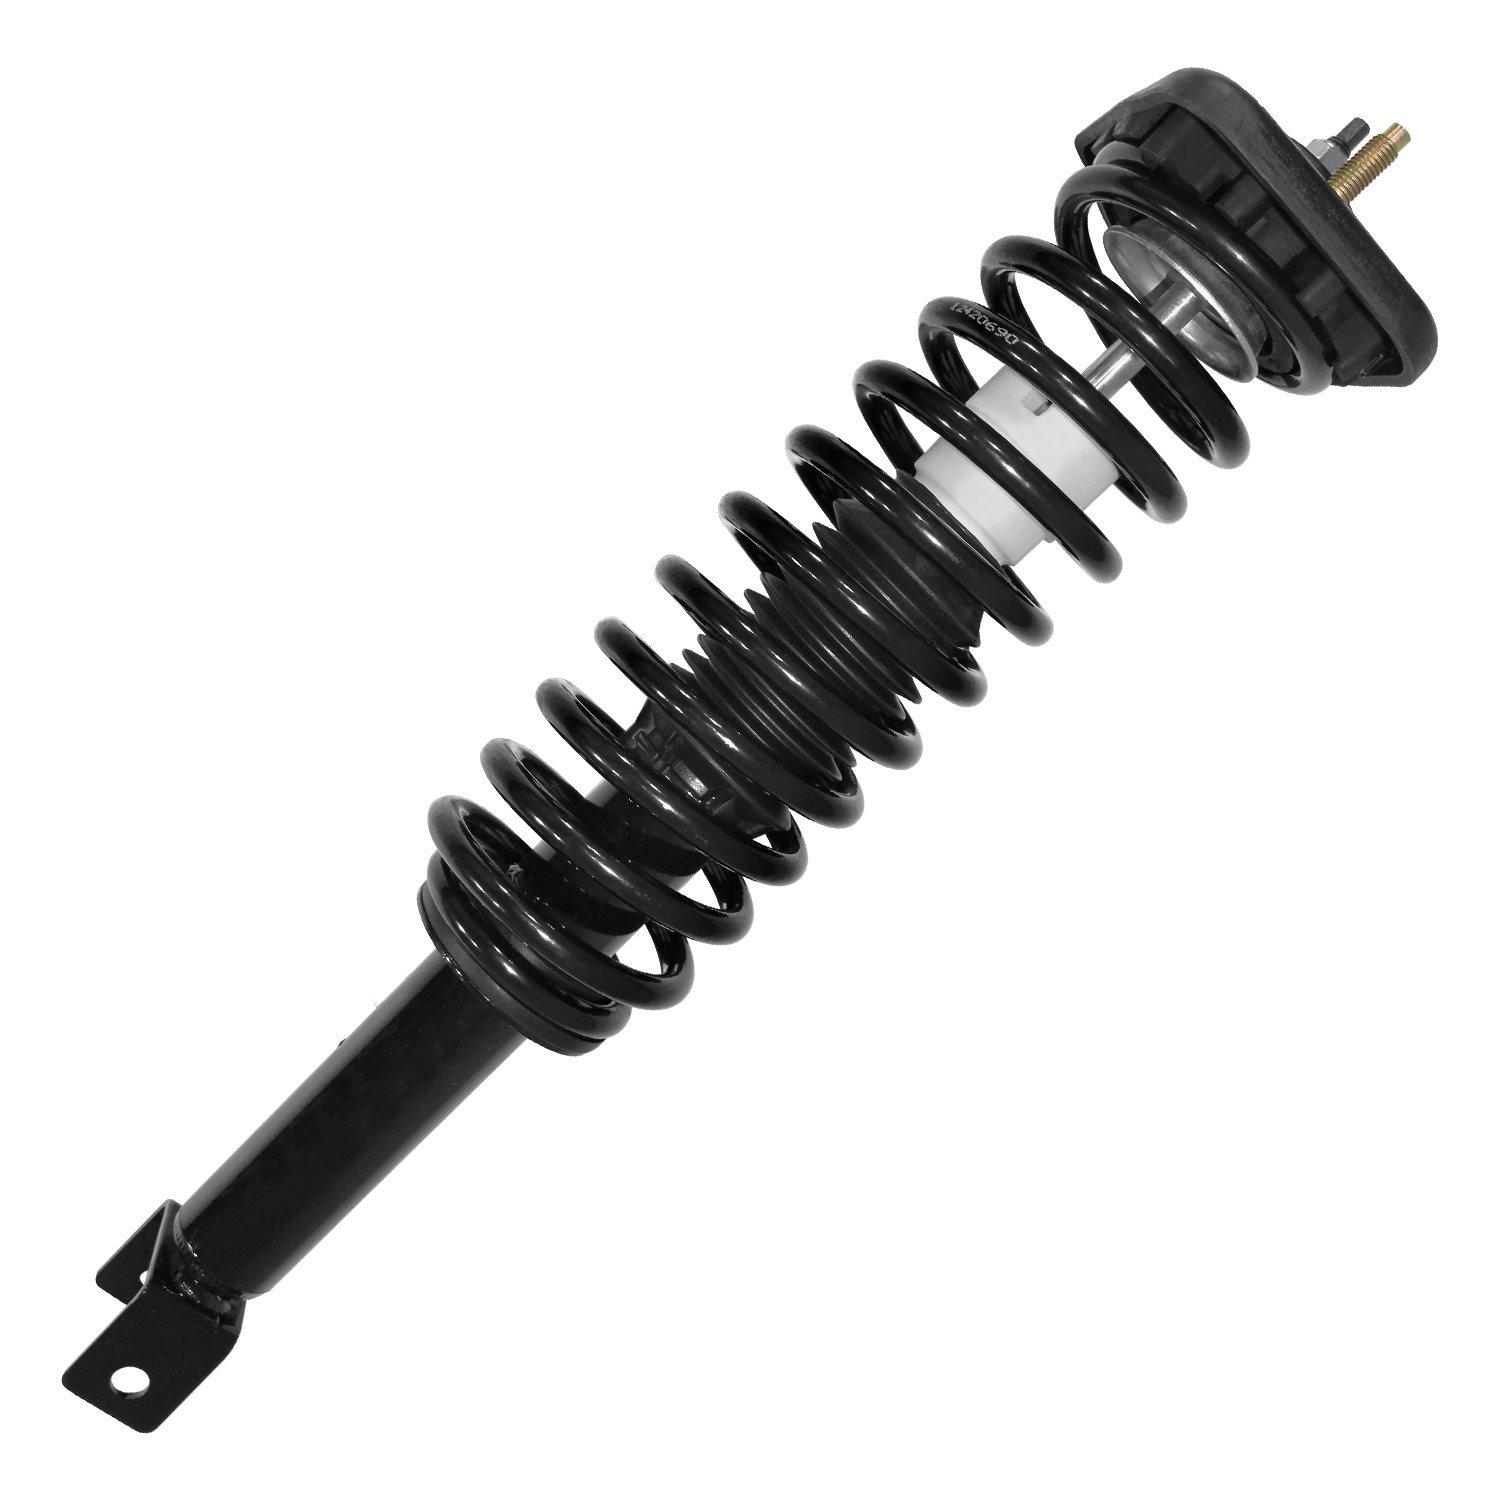 15360 Suspension Strut & Coil Spring Assembly Fits Select Chrysler Cirrus, Dodge Stratus, Plymouth Breeze